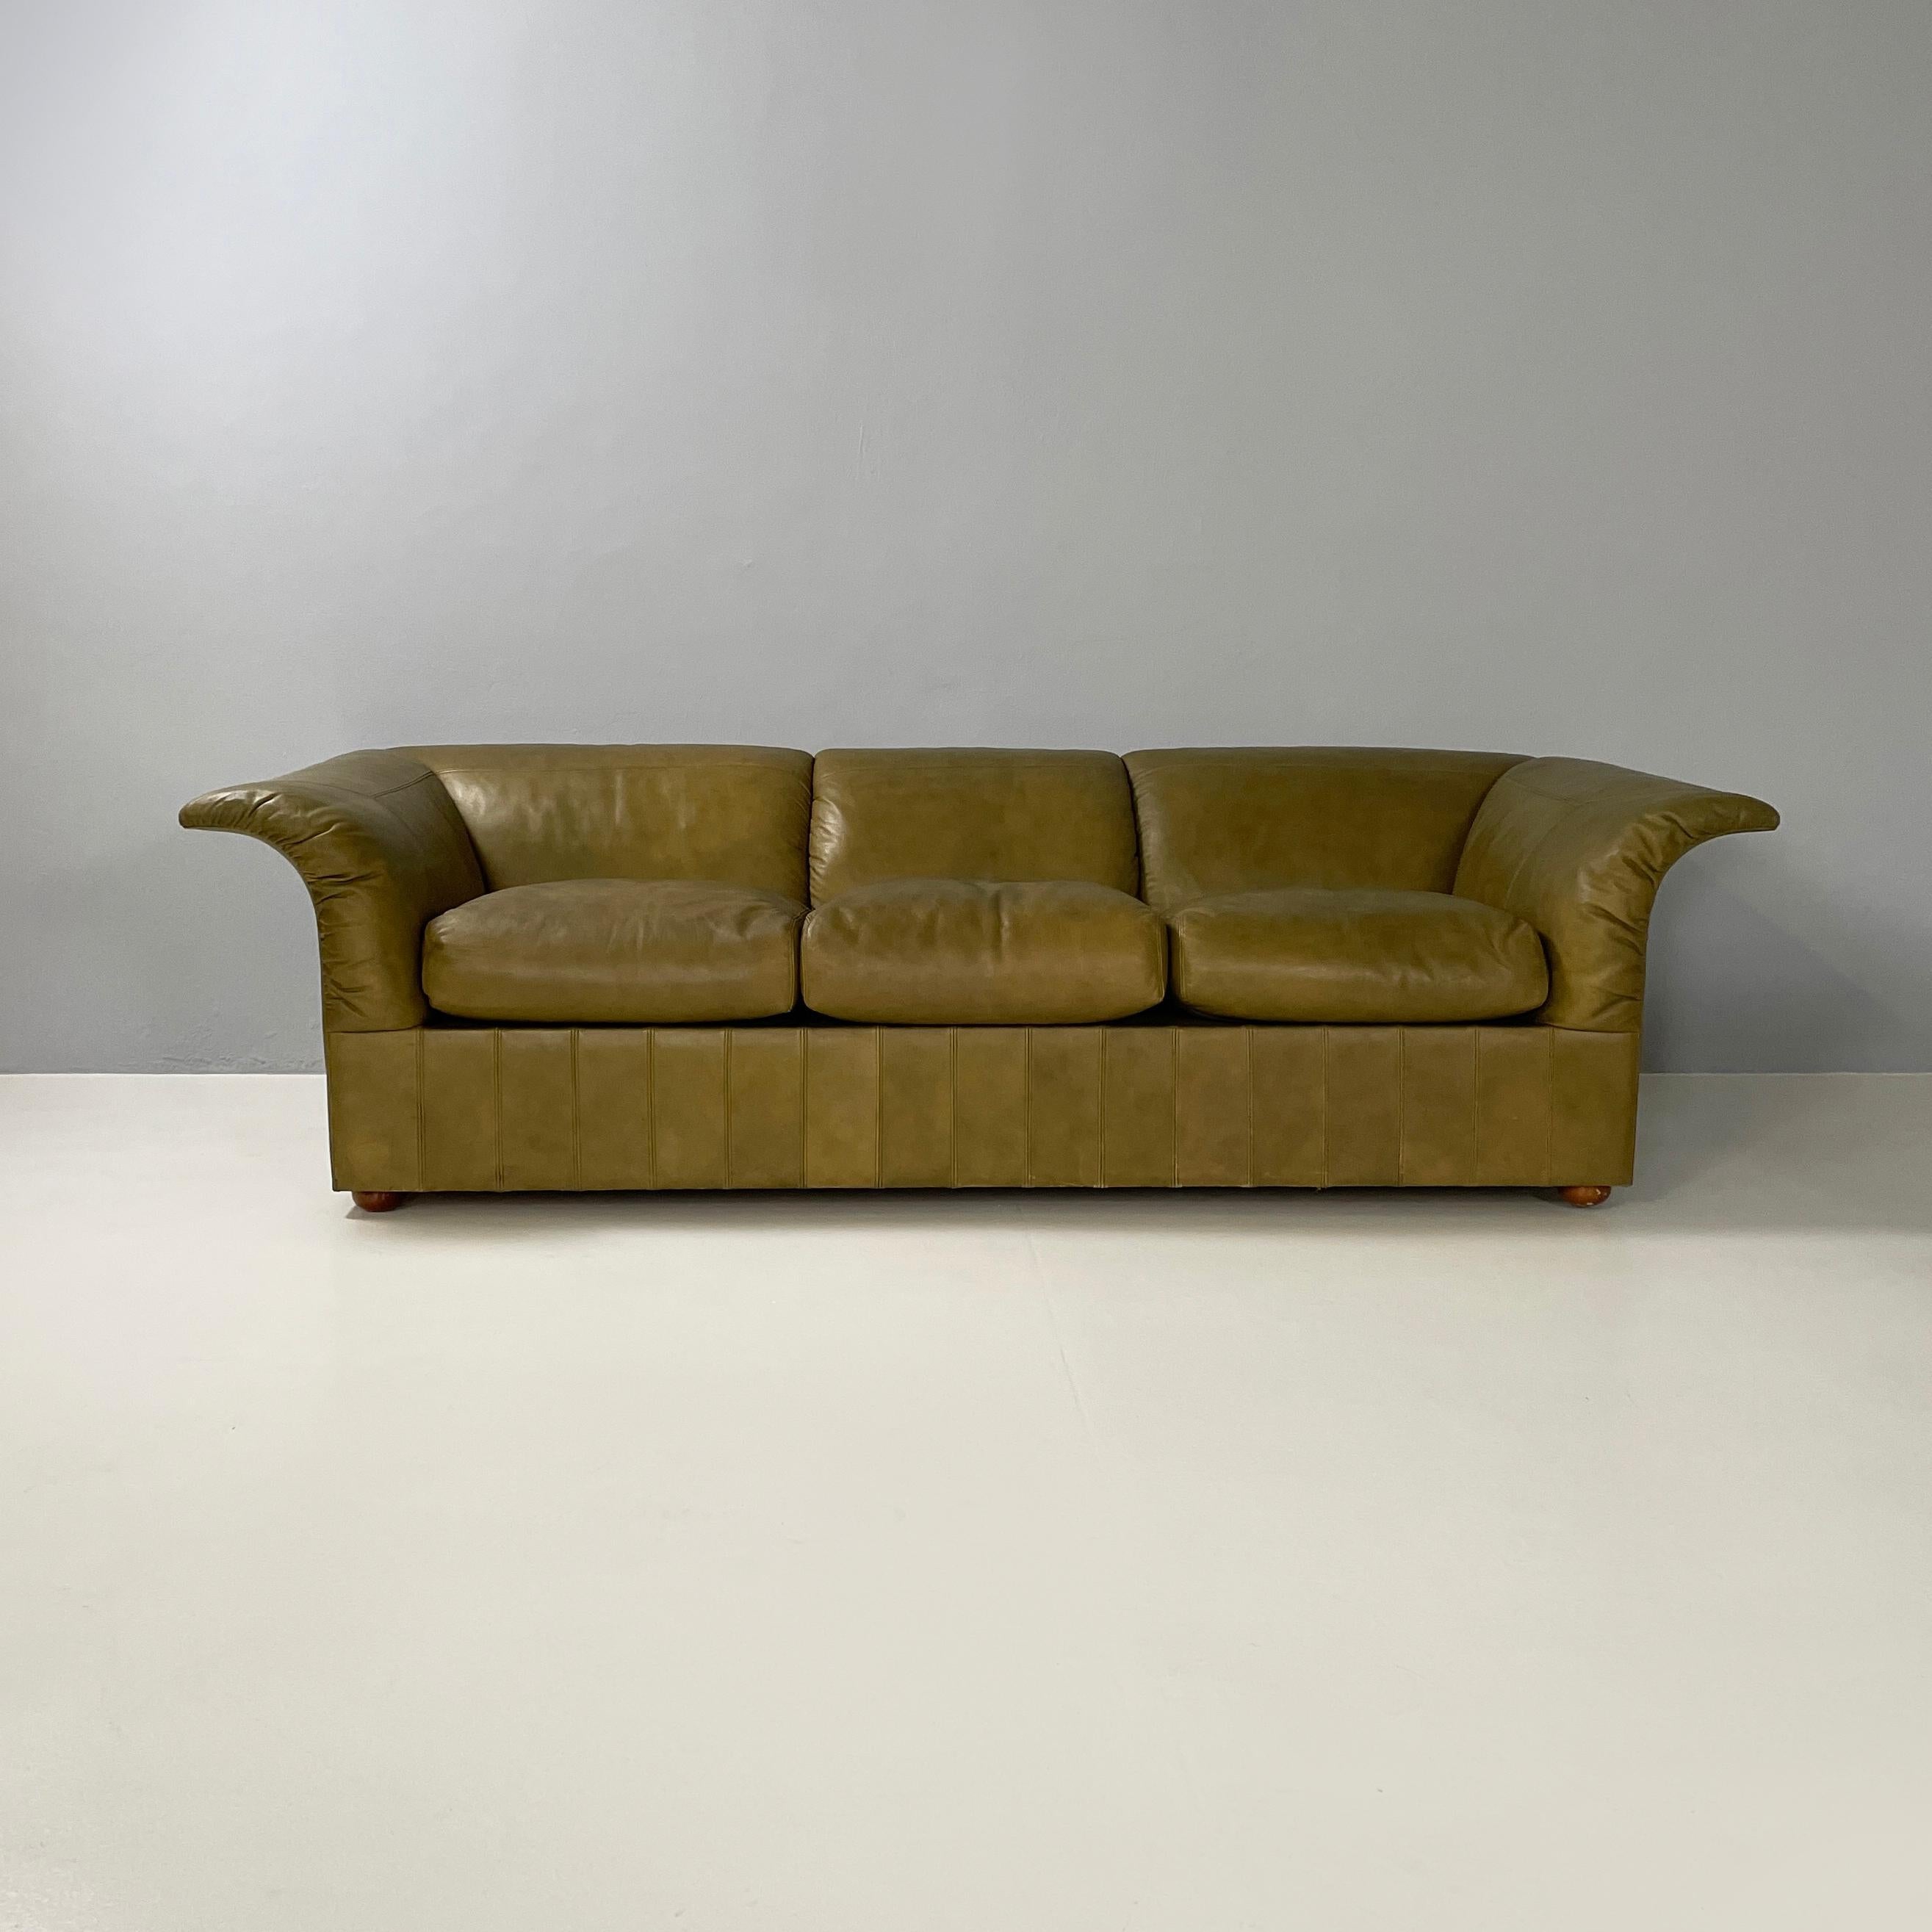 Italian modern Green leather sofa by  Luigi Massoni for Poltrona Faru, 1970s
Three-seater sofa fully padded and covered in dark green leather. The seat is made up of 3 padded cushions. The cantilevered backrest and armrests feature decorative